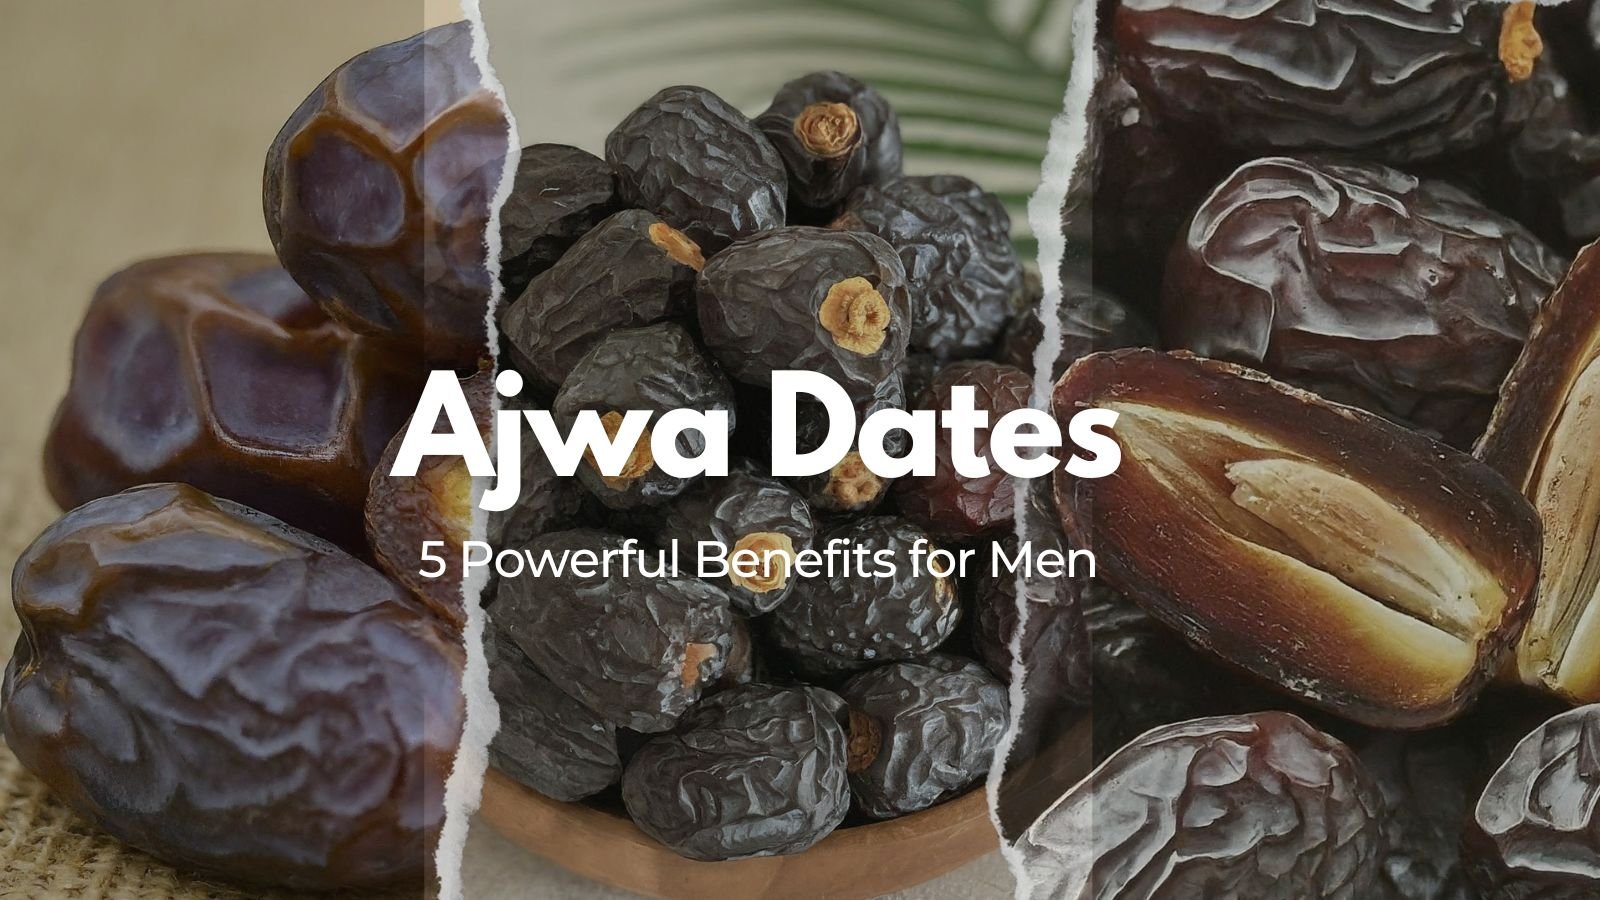 You are currently viewing Saudi Ajwa Dates: 5 Powerful Benefits for Men